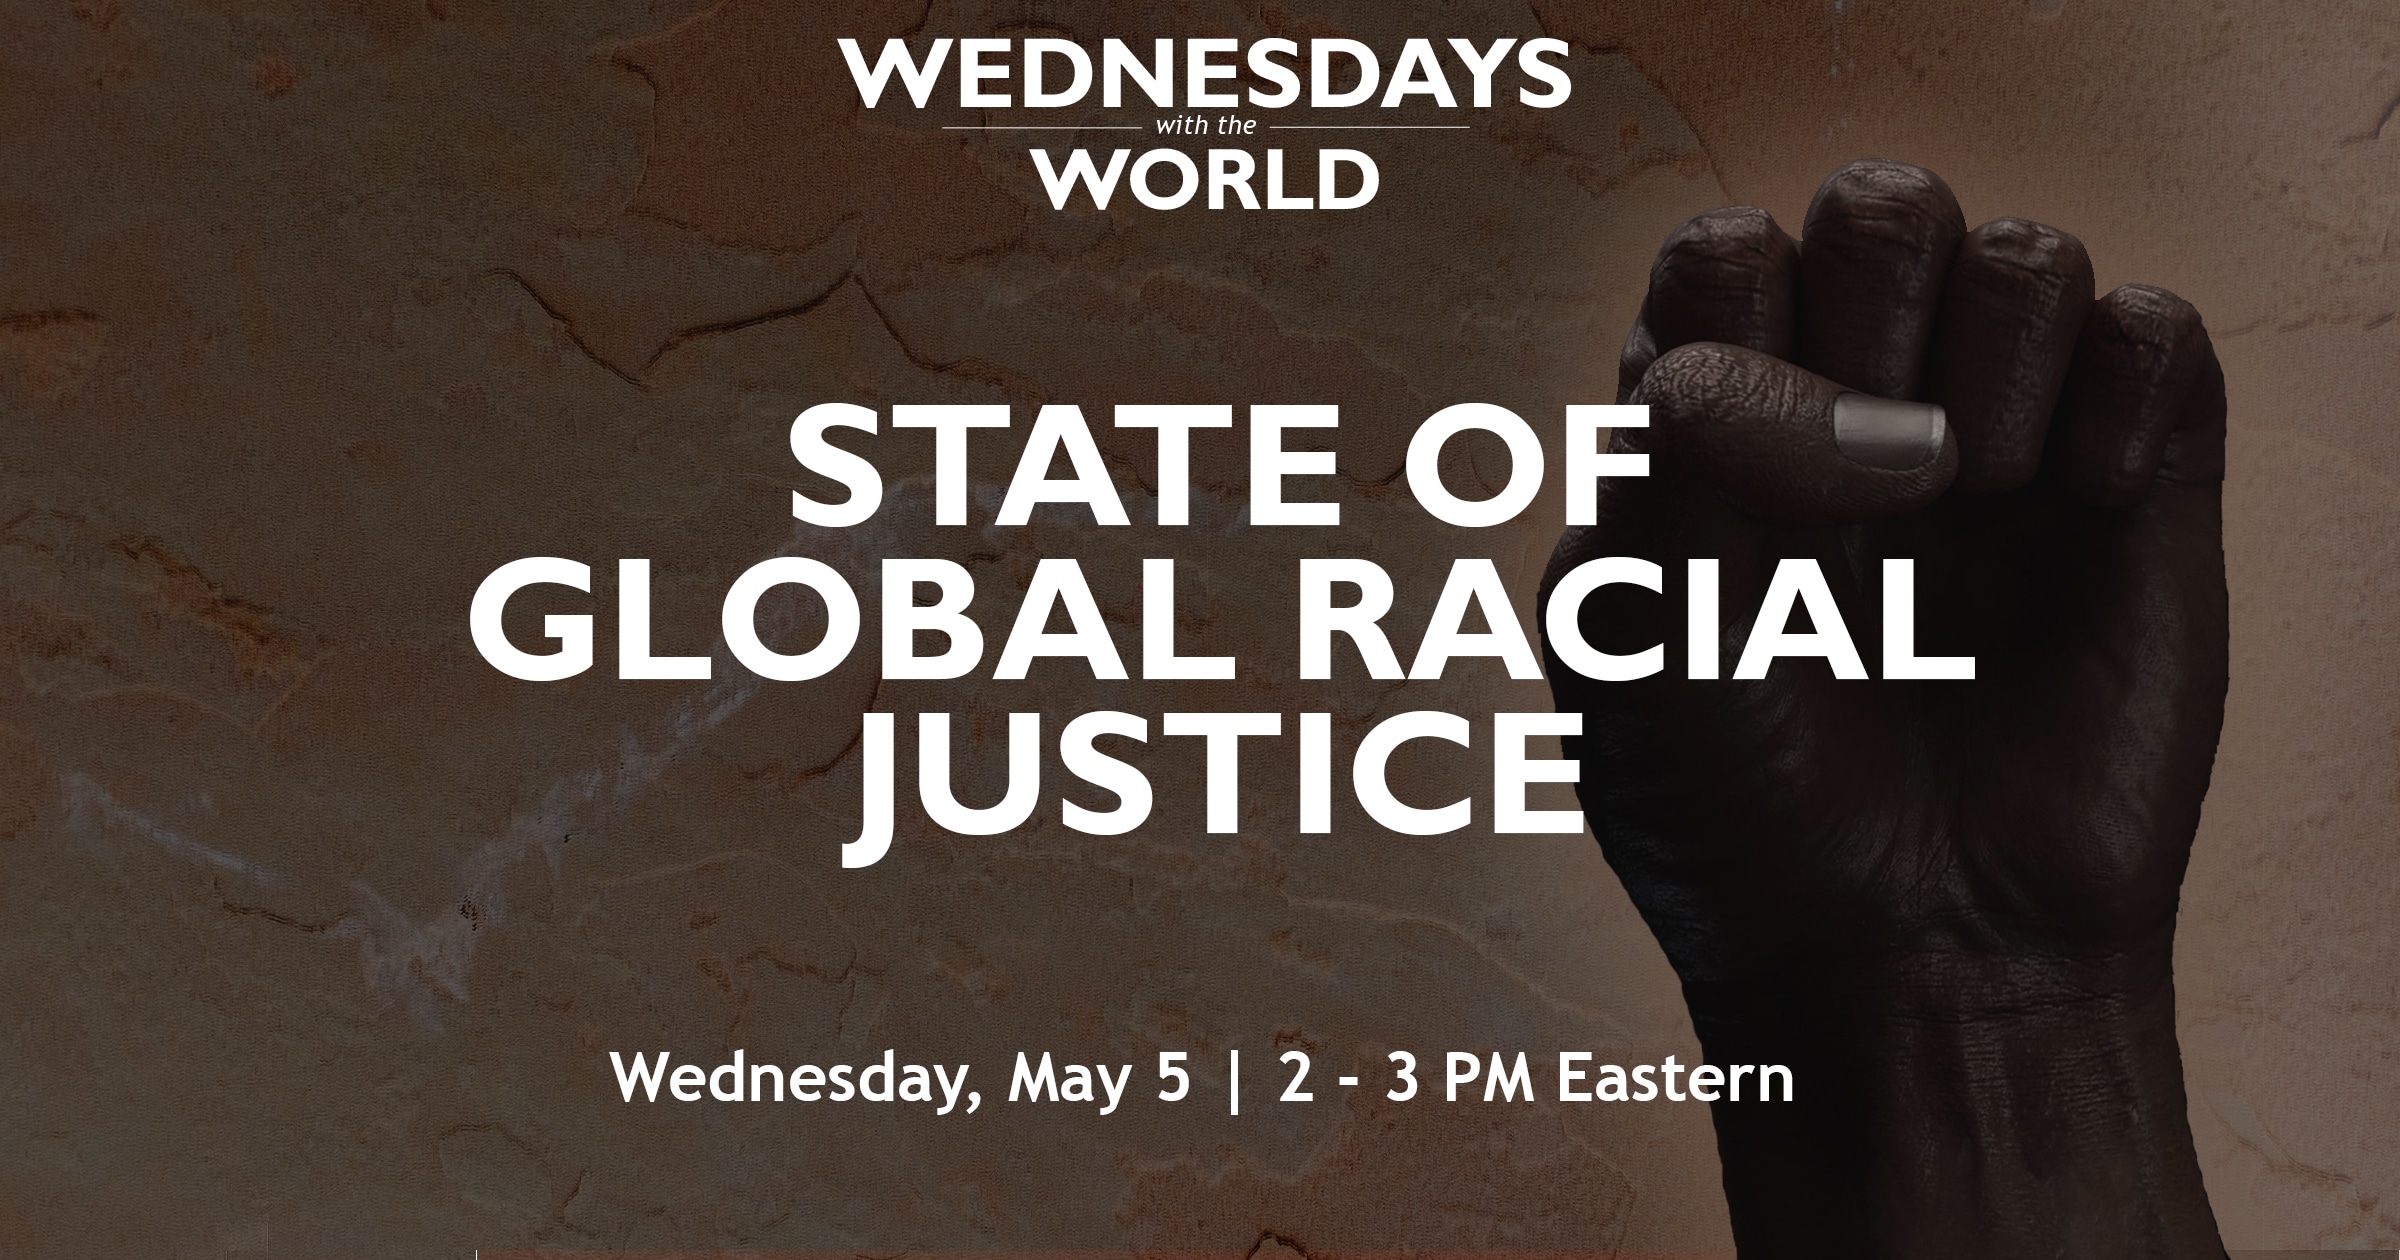 State-of-Global-Racial-Justice-Wednesdays with-the-World-May 3, 2021